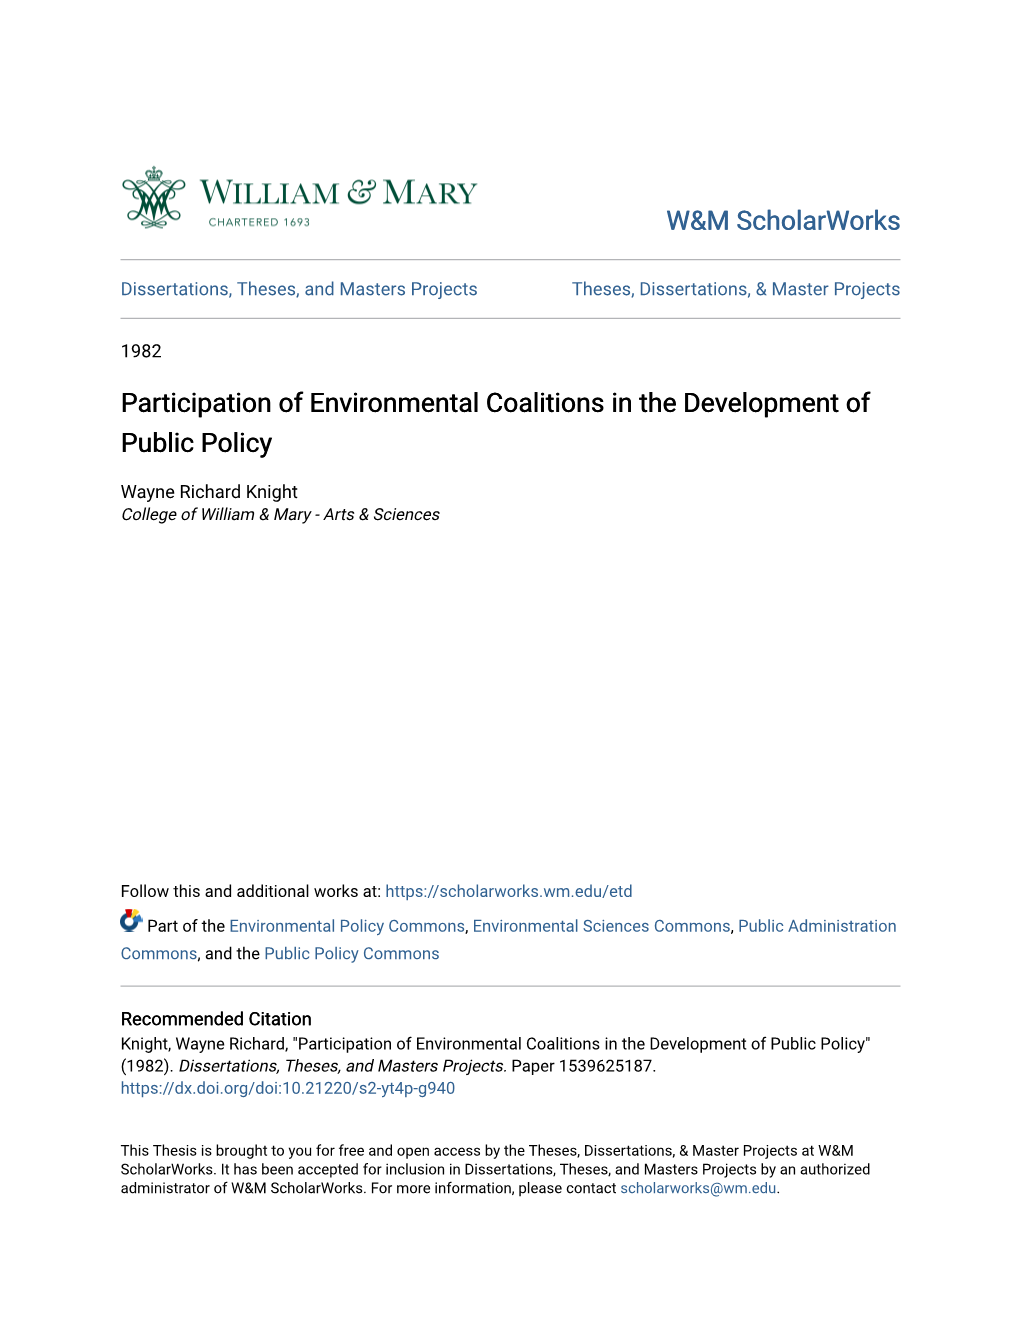 Participation of Environmental Coalitions in the Development of Public Policy